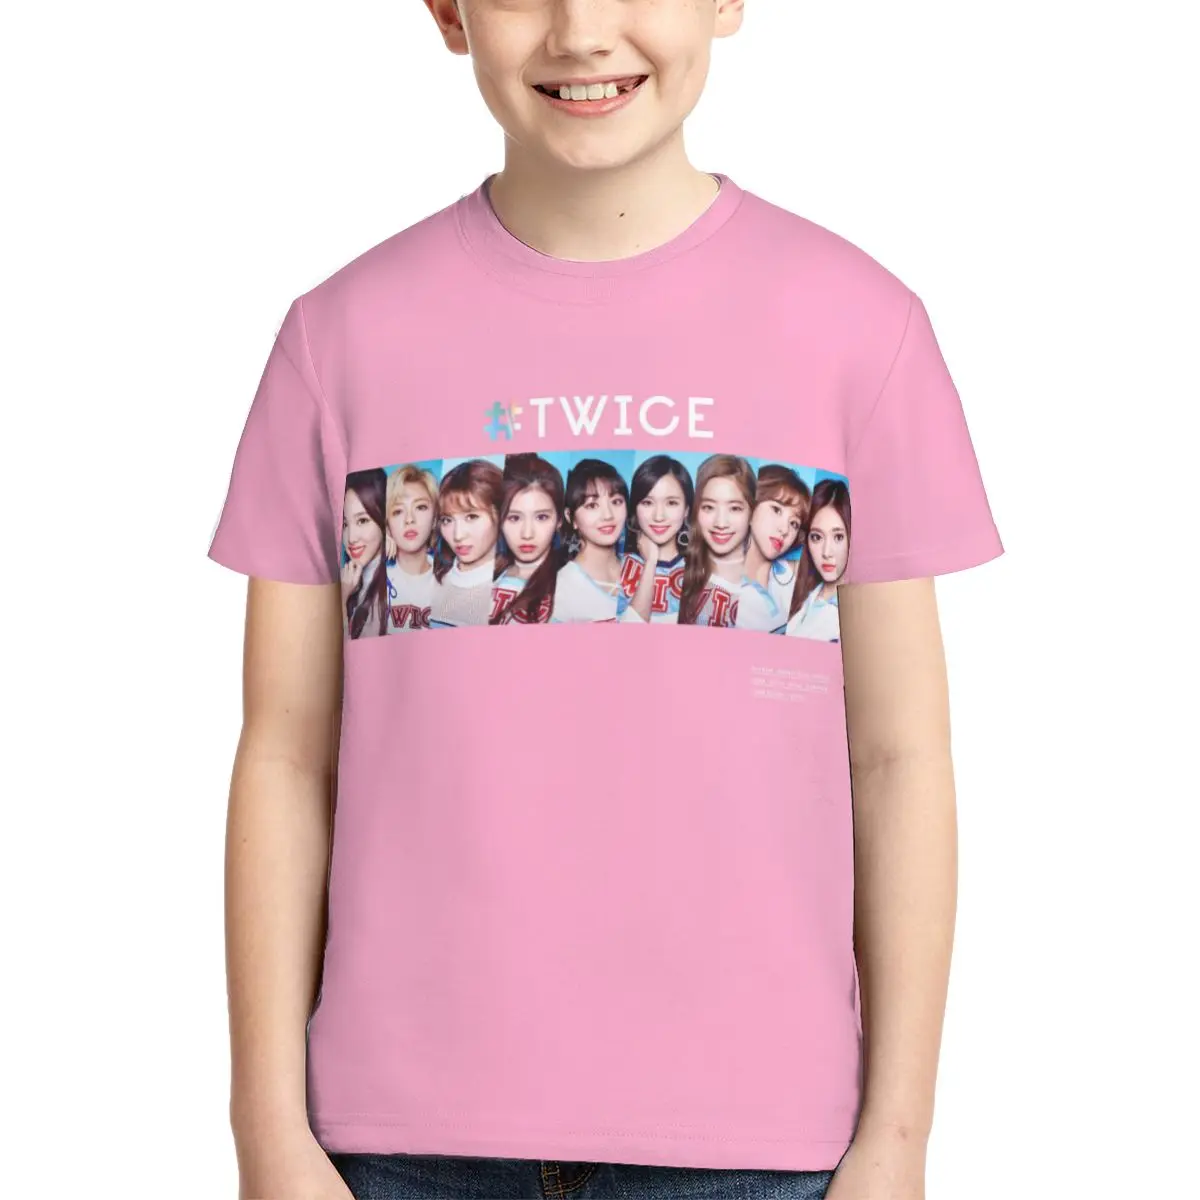 

Kpop TWICE Girl Group T Shirt - Short Sleeve Crew Neck Soft Fitted Tee Shirts for Teen Girl & Boy